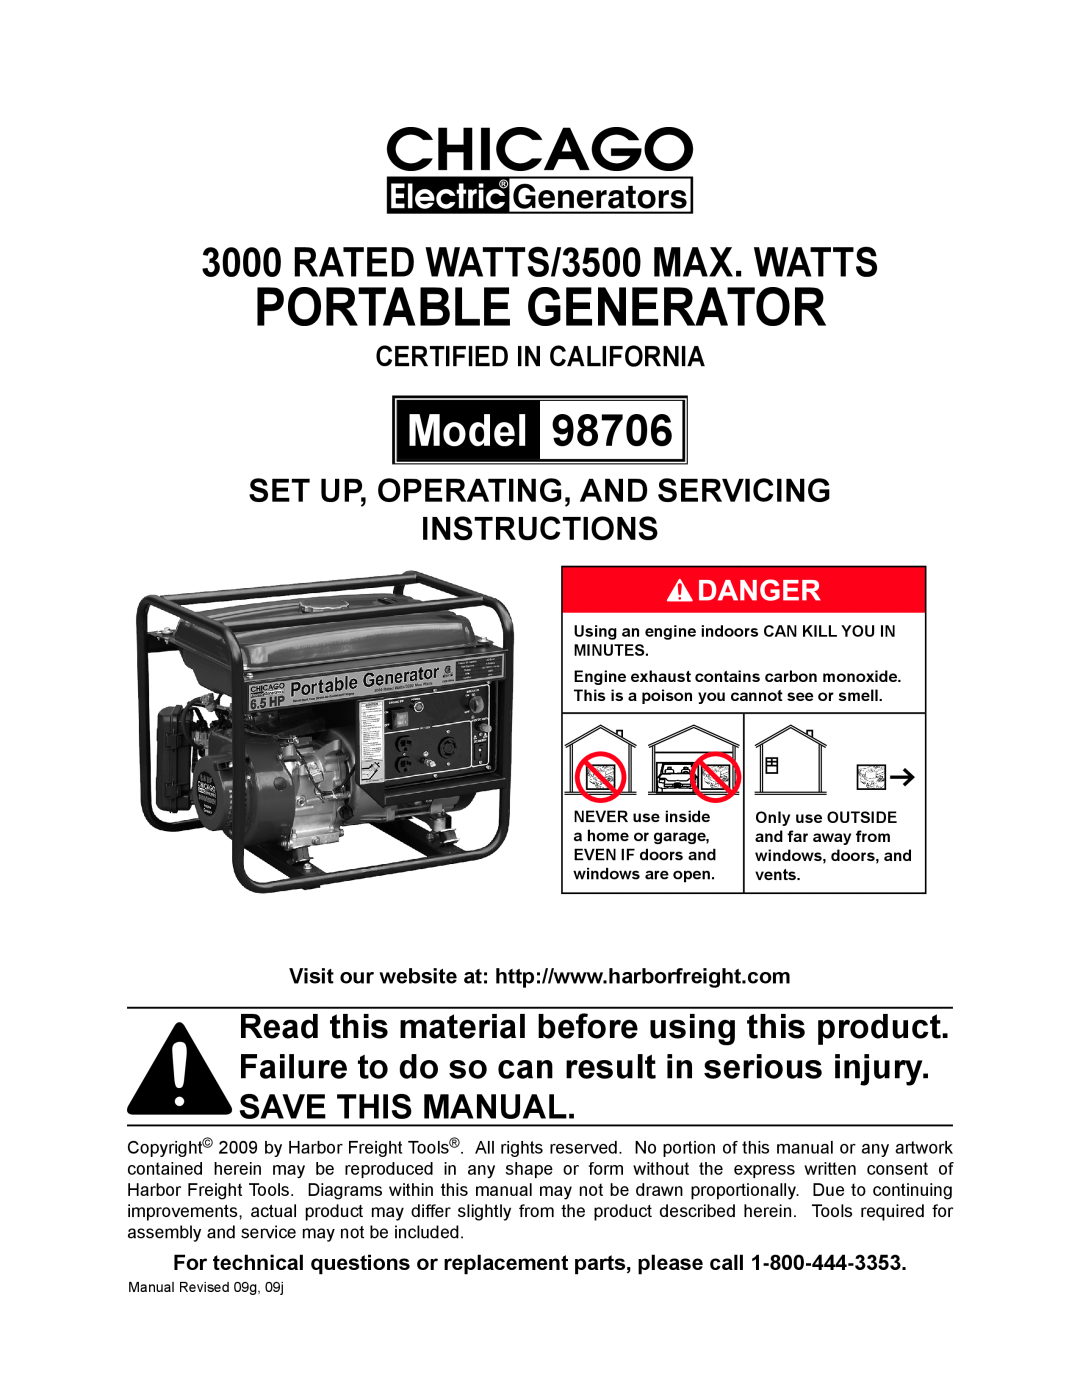 Chicago Electric 98706 manual Certified in California, portable generator, Model, RATED Watts/3500 MAX. watts 